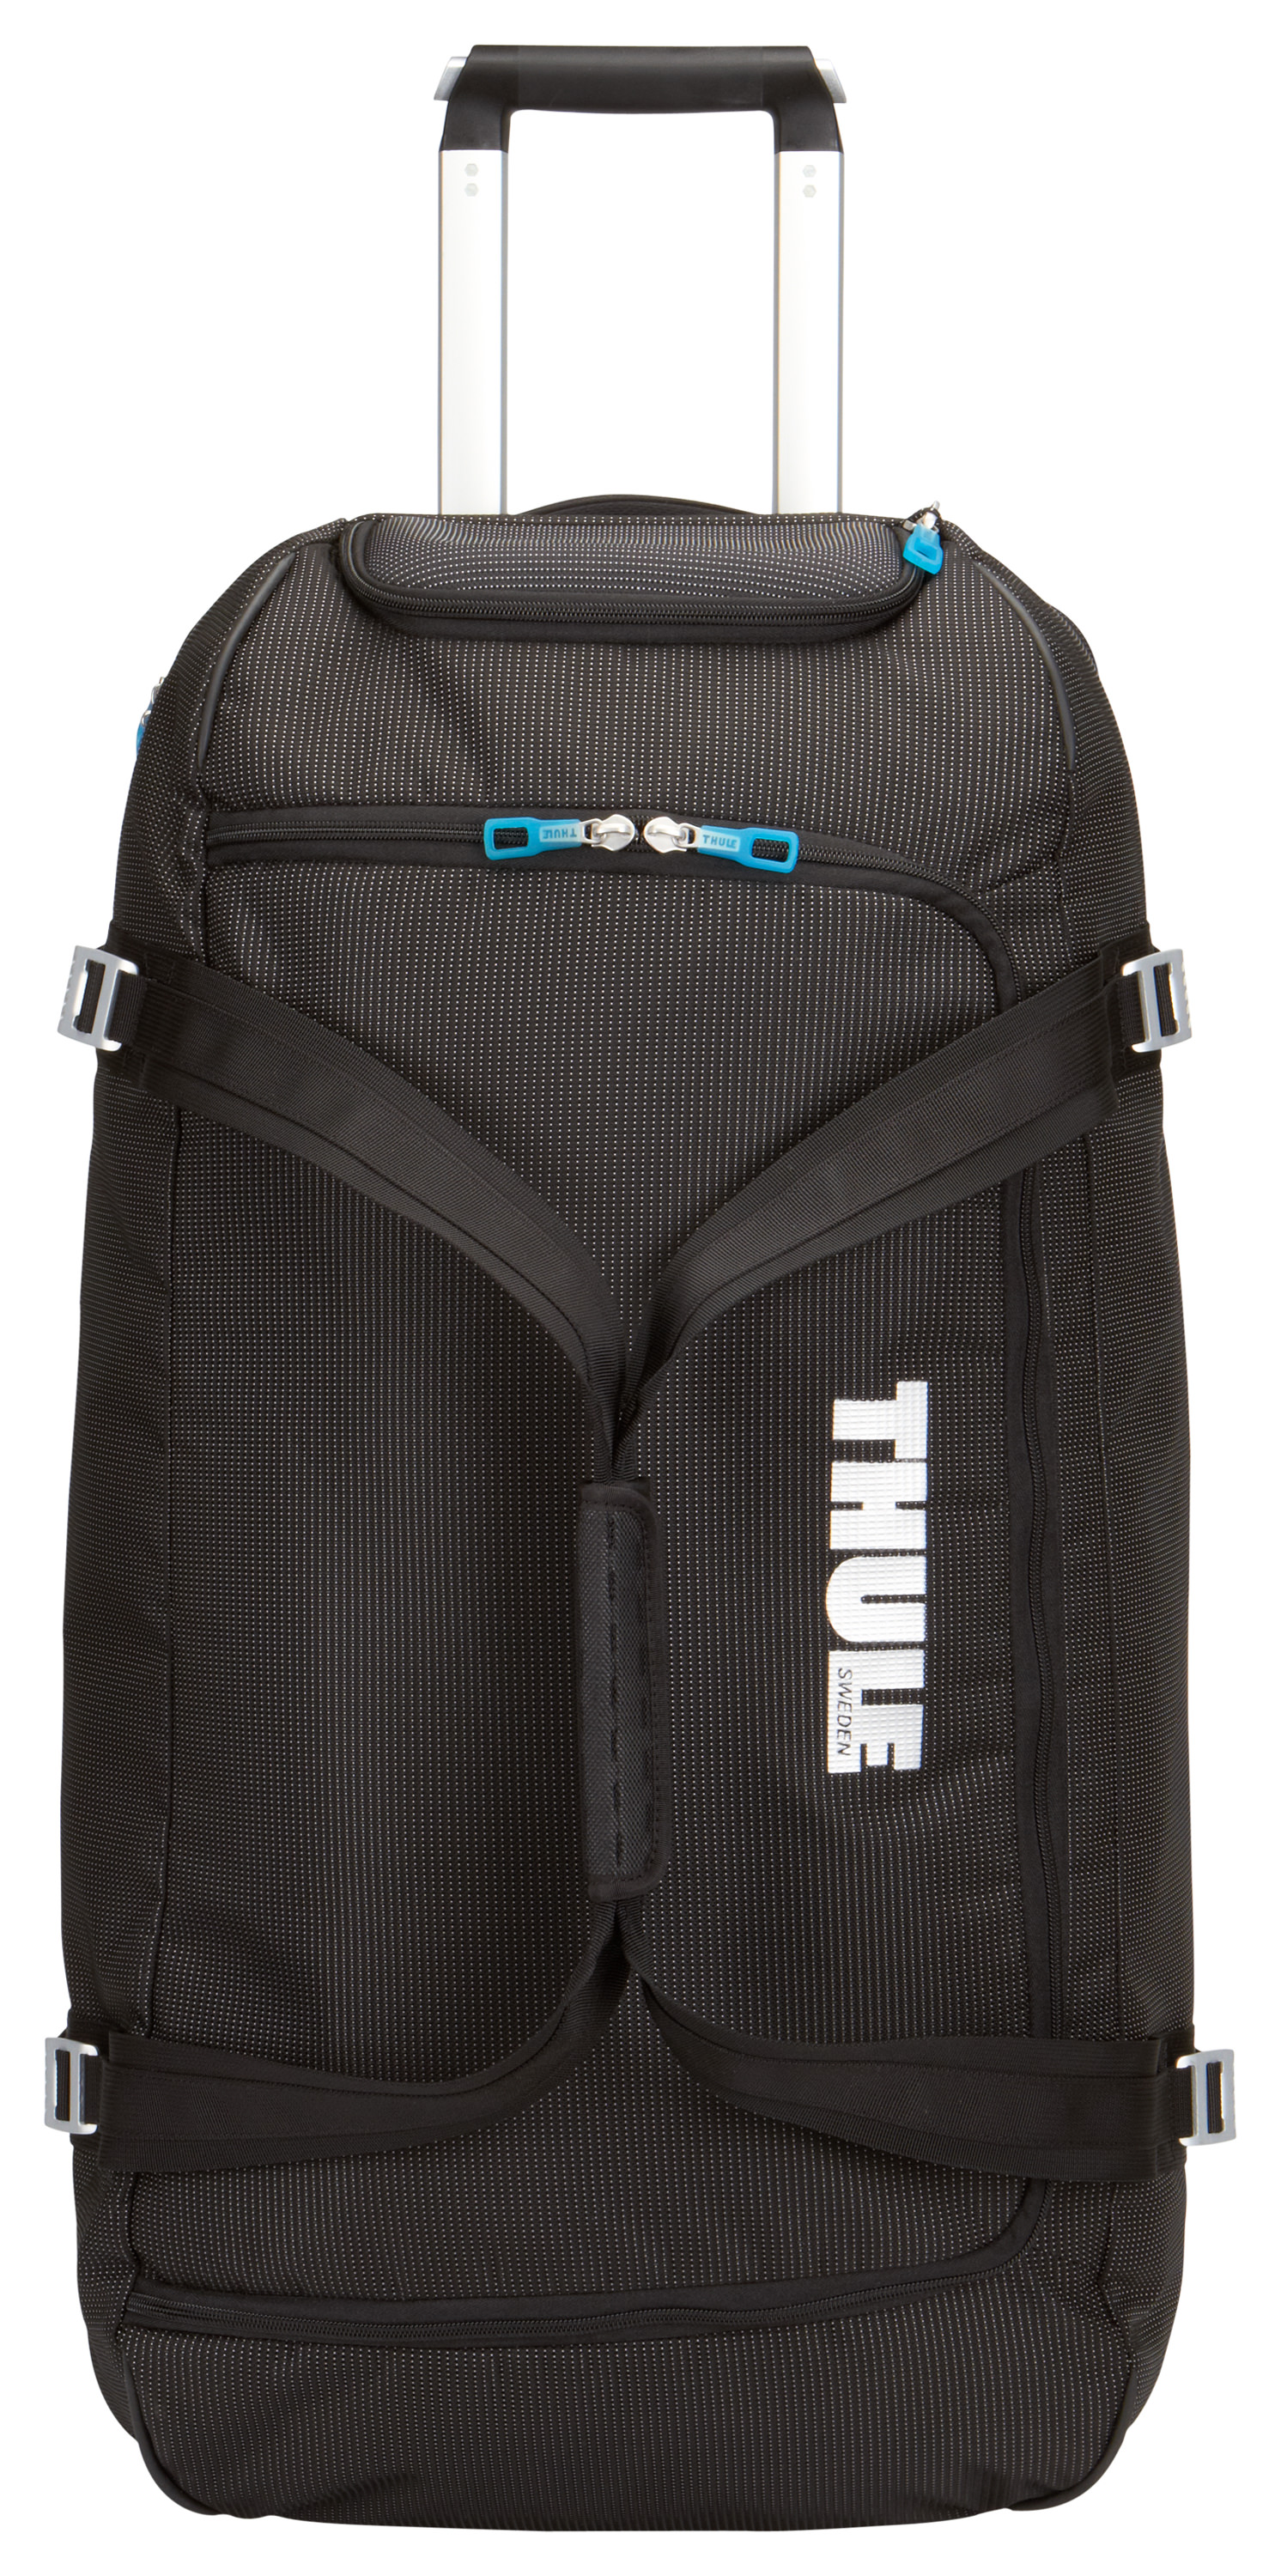 Thule Rolling Duffle Travel Bag Review | Cool Things Collection | 0